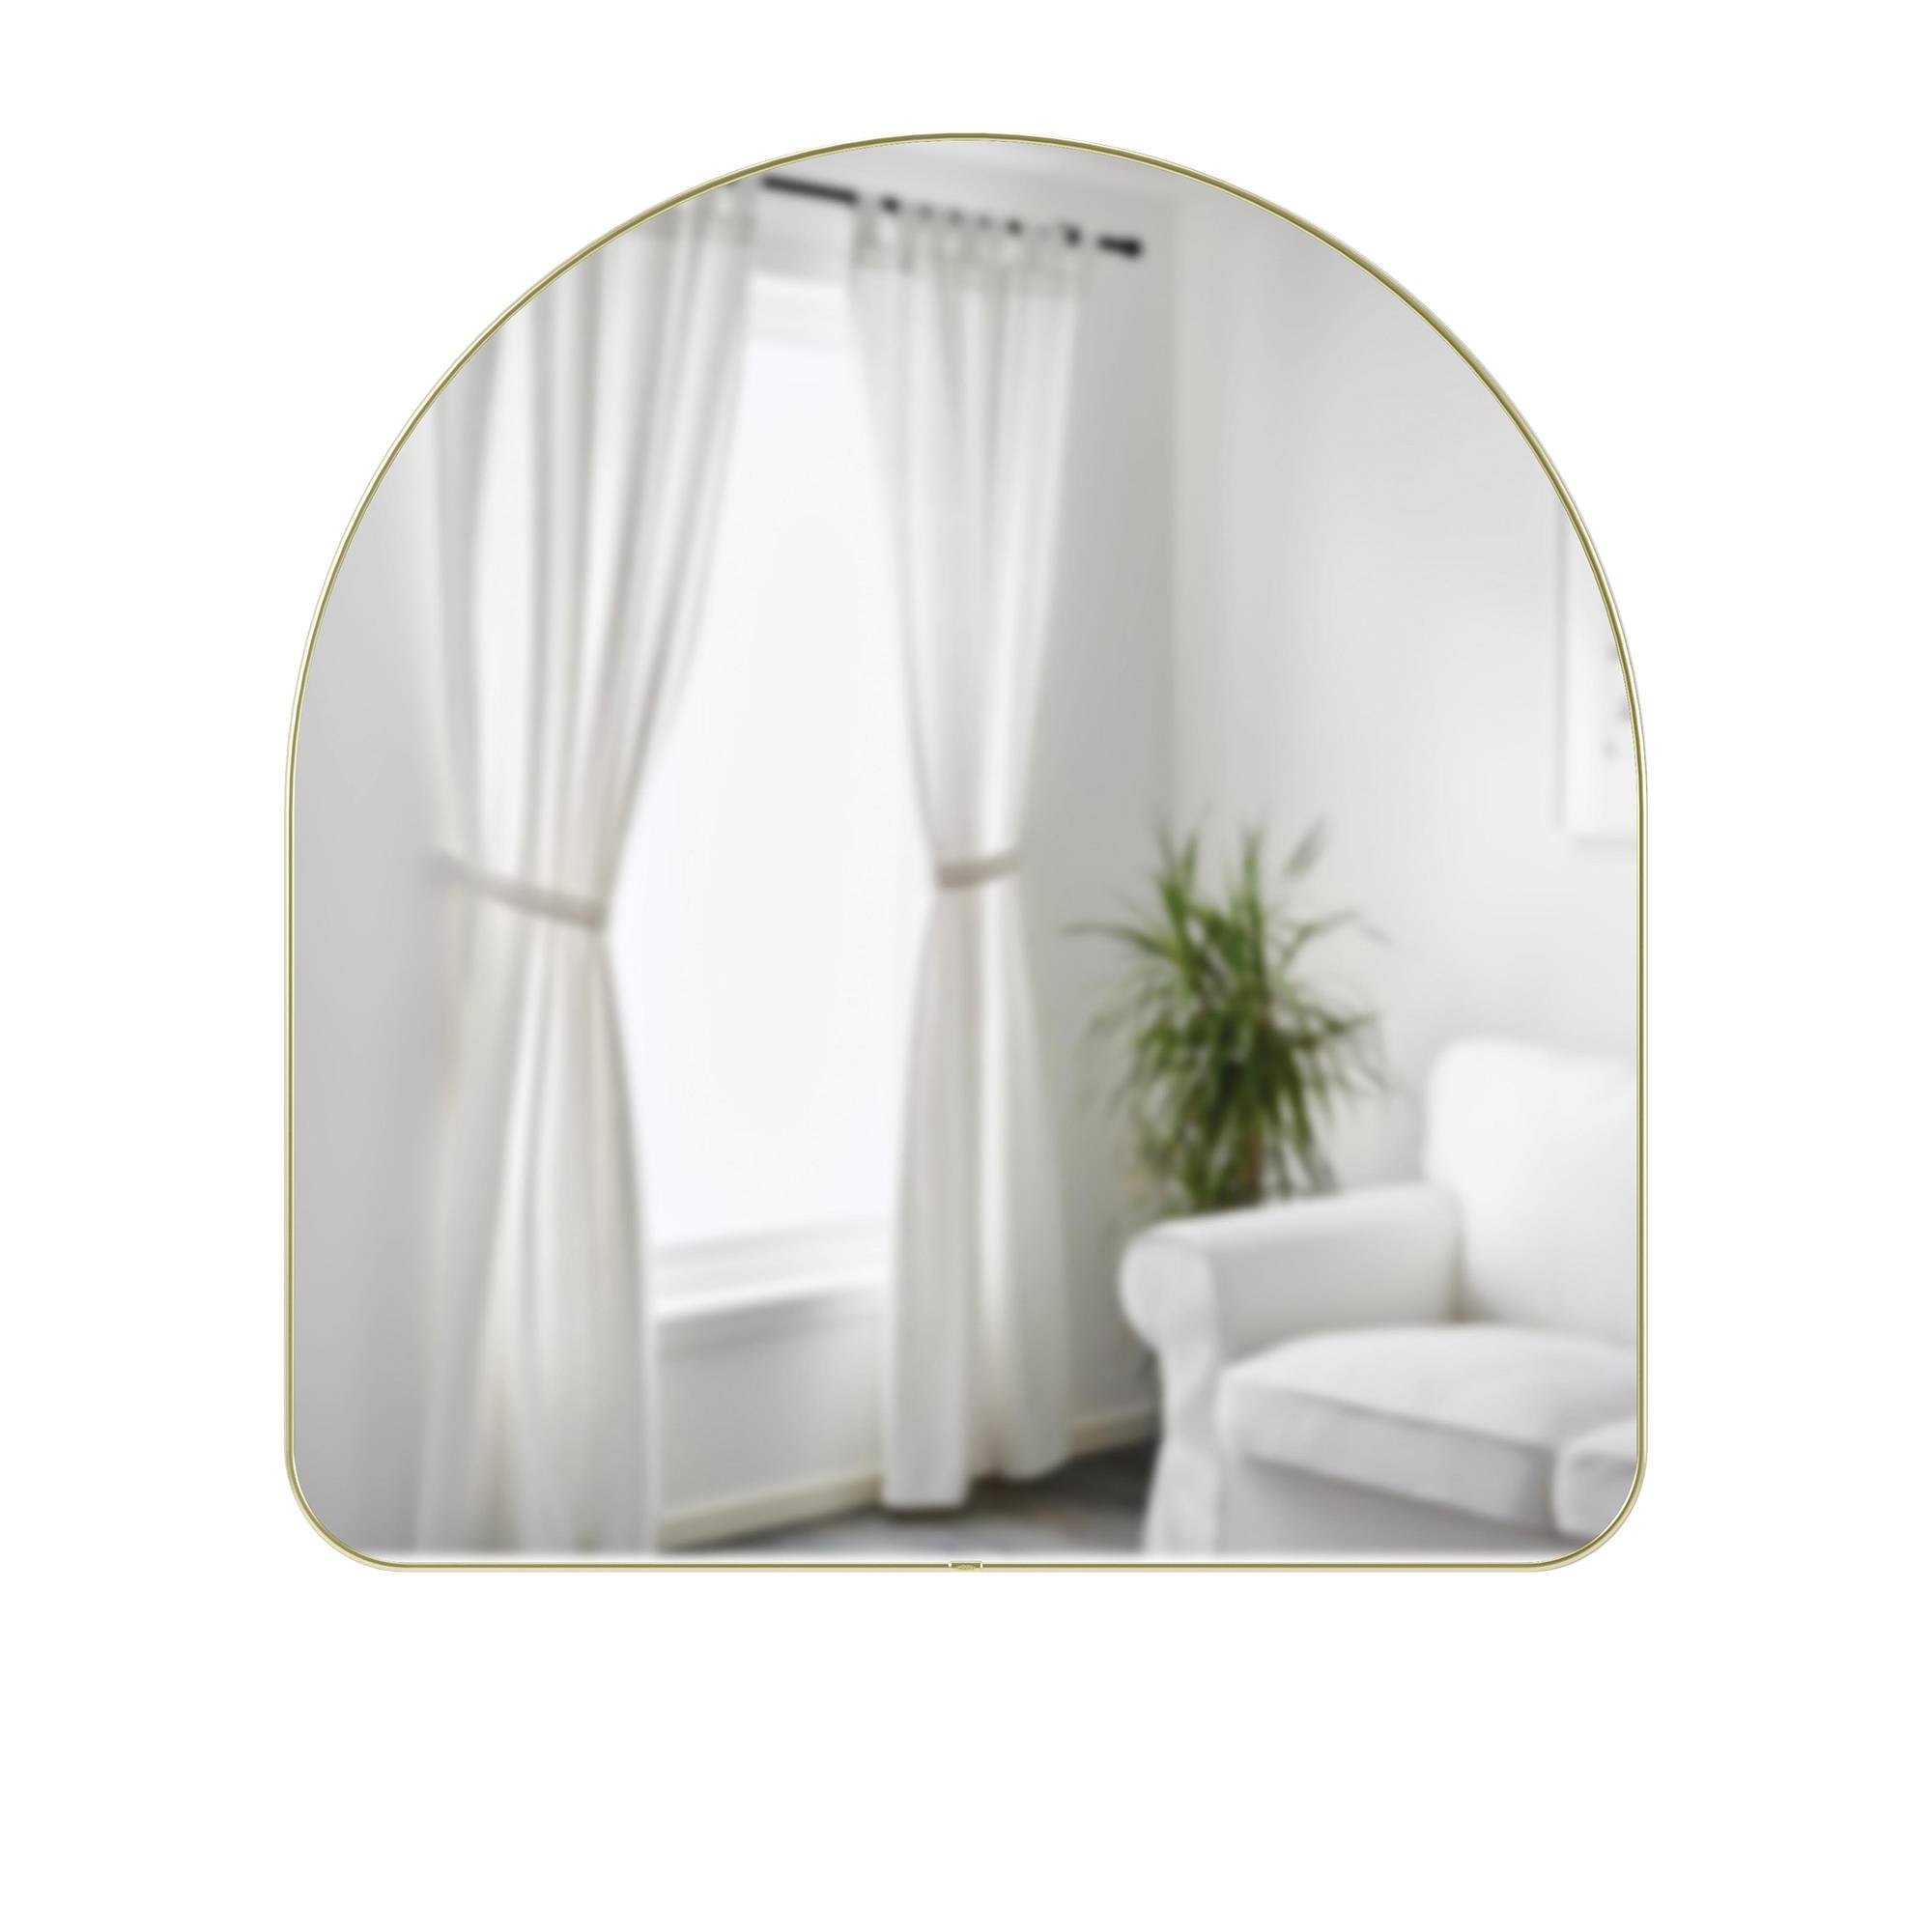 Umbra Hubba Arched Mirror Brass Image 1